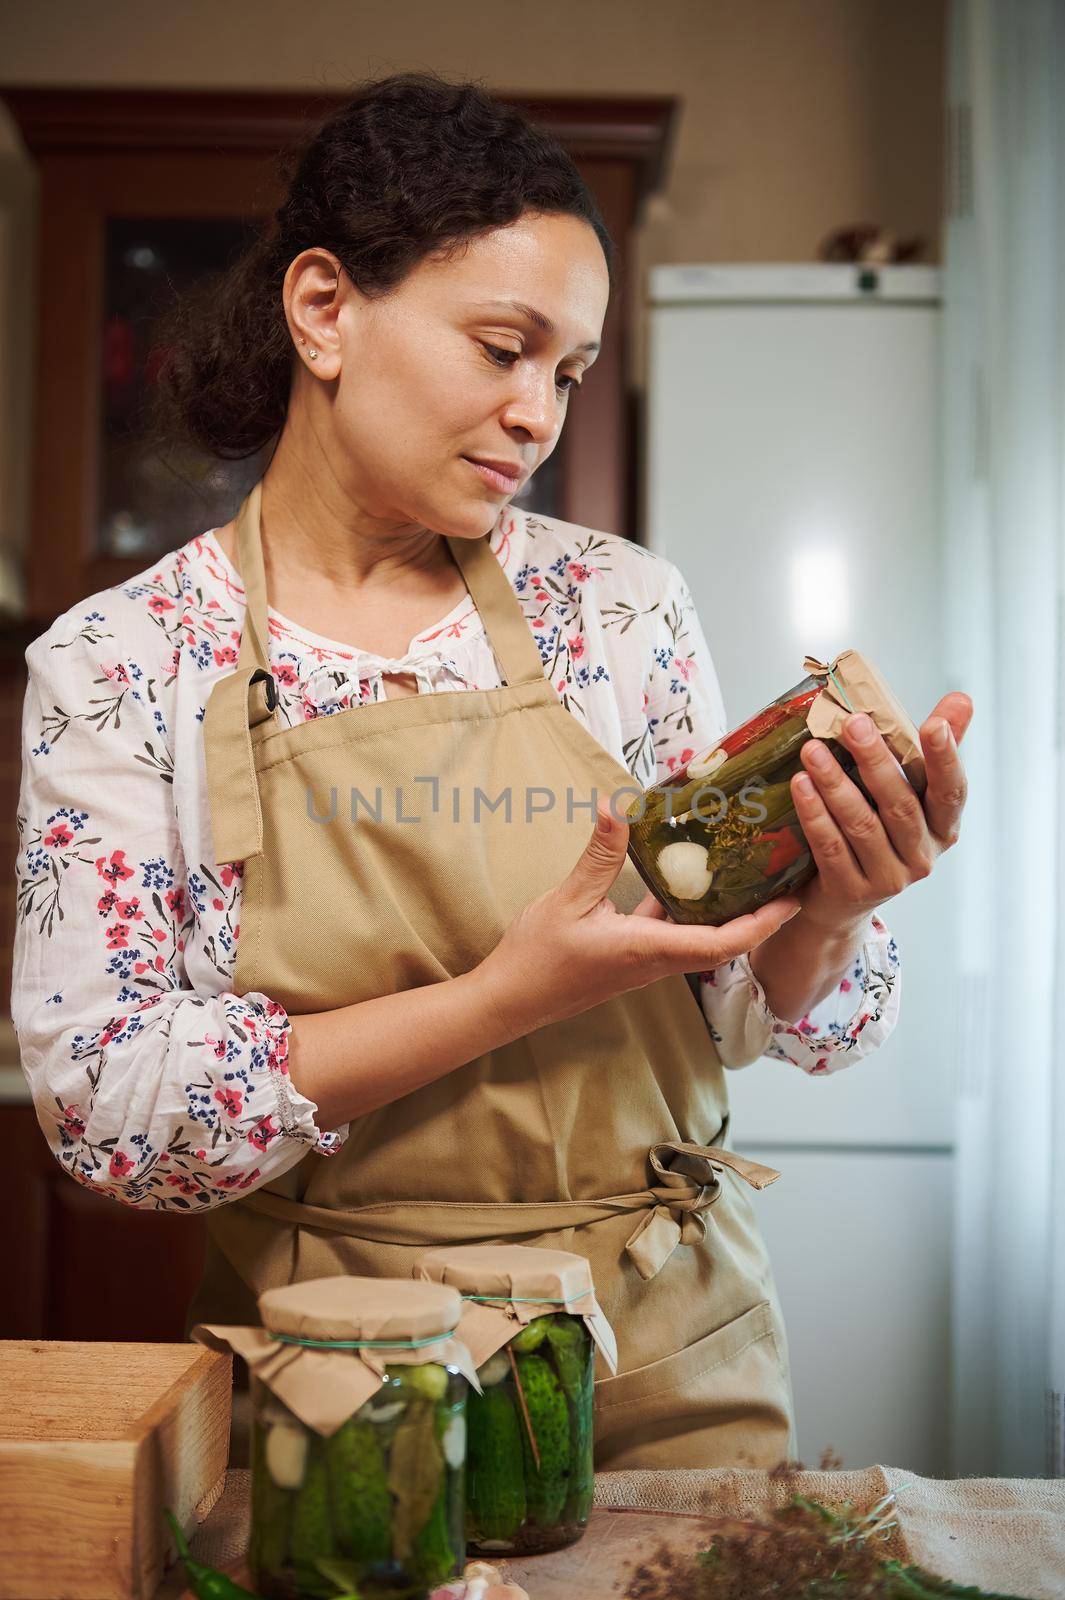 Delightful serene housewife looking at the jar with marinated chili peppers, she hold in her hands, standing by a kitchen table with cans of homemade pickled cucumbers and pickling ingredients